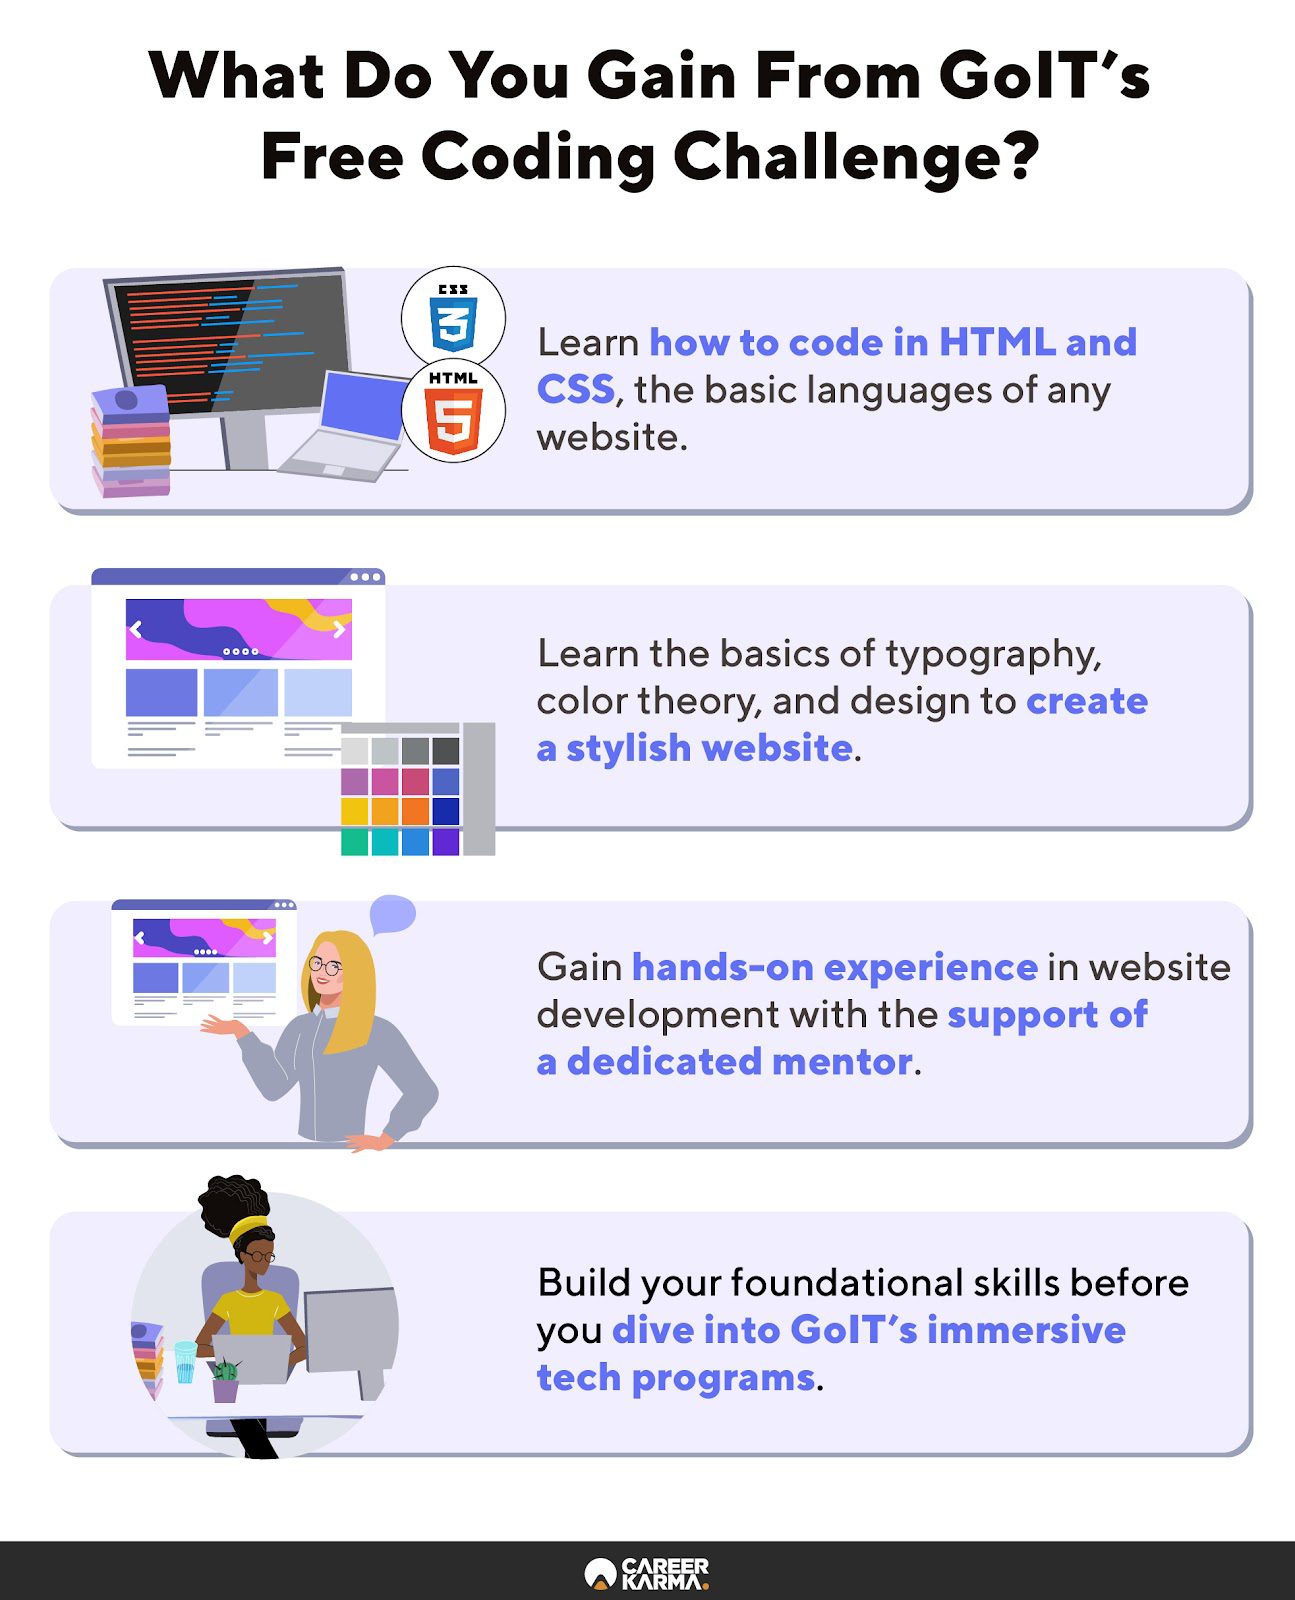 An infographic highlighting the benefits of joining GoIT’s free coding challenge